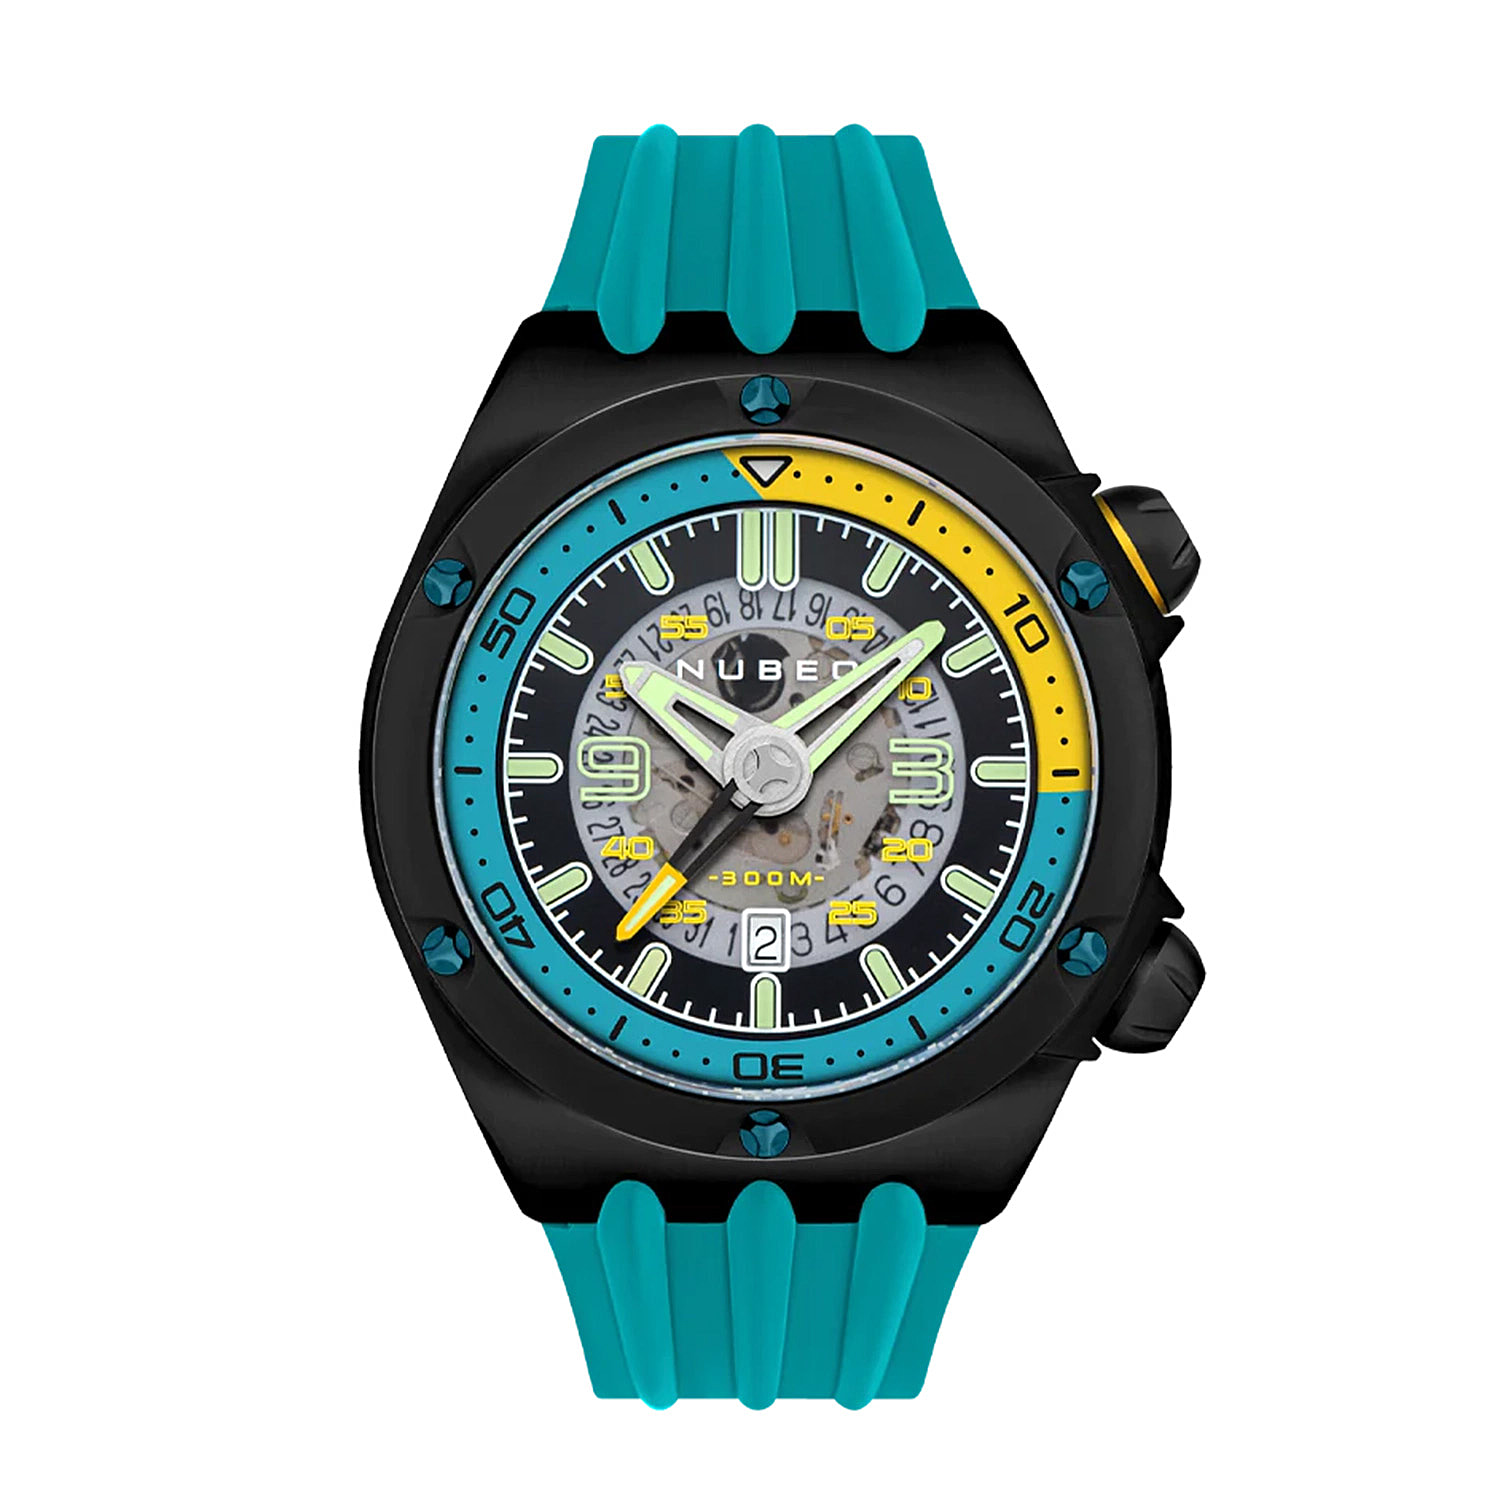 NUBEO-Limited-Edt-Japan-Movt-30-ATM-Water-Resistant-Nereus-Watch-with-